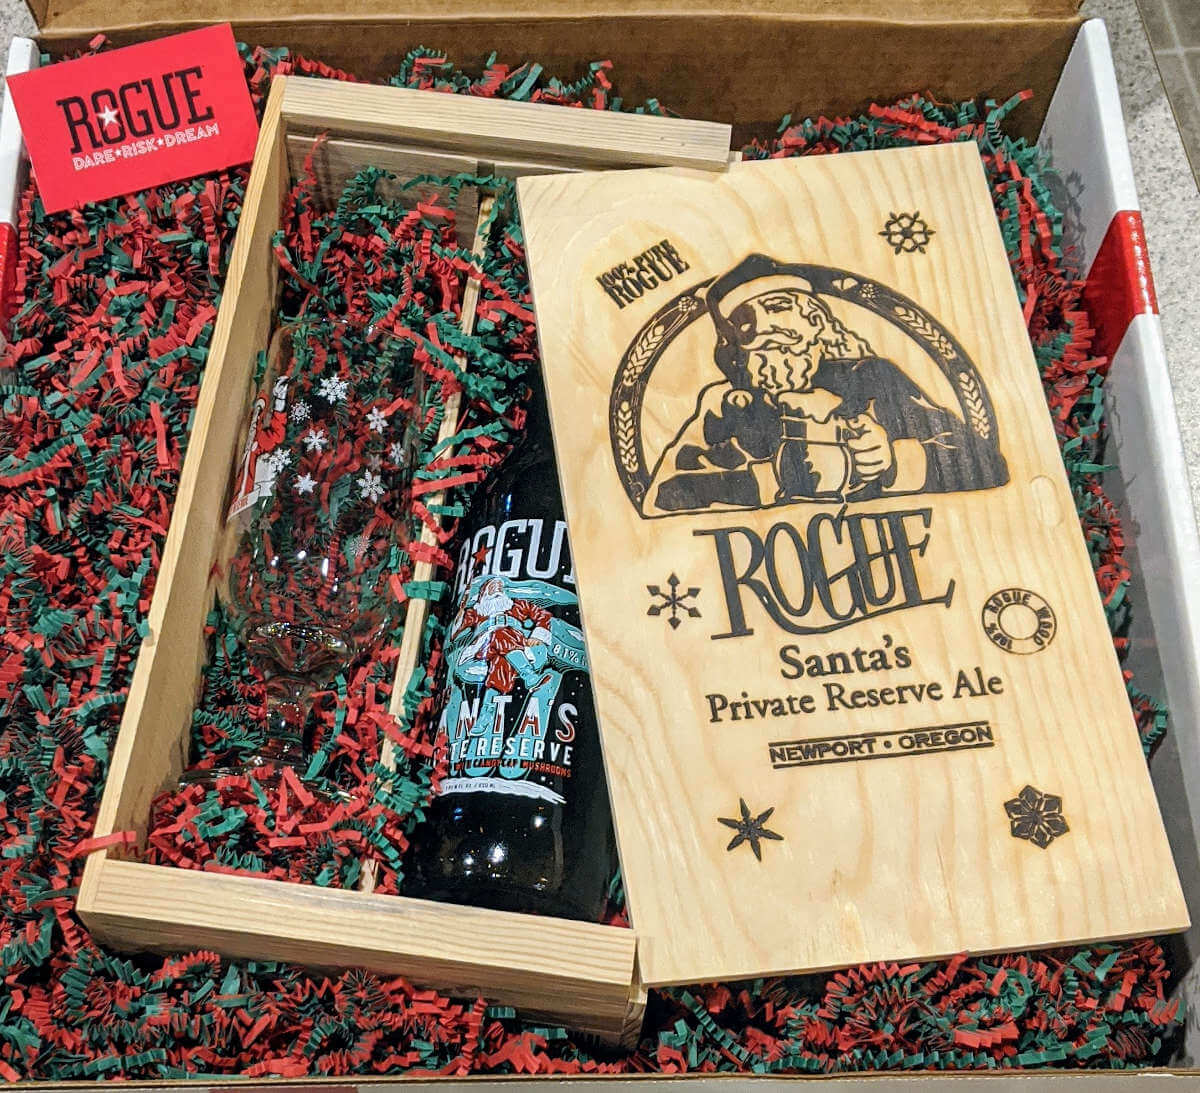 Received: Rogue Ales Santa’s Private Reserve 2019